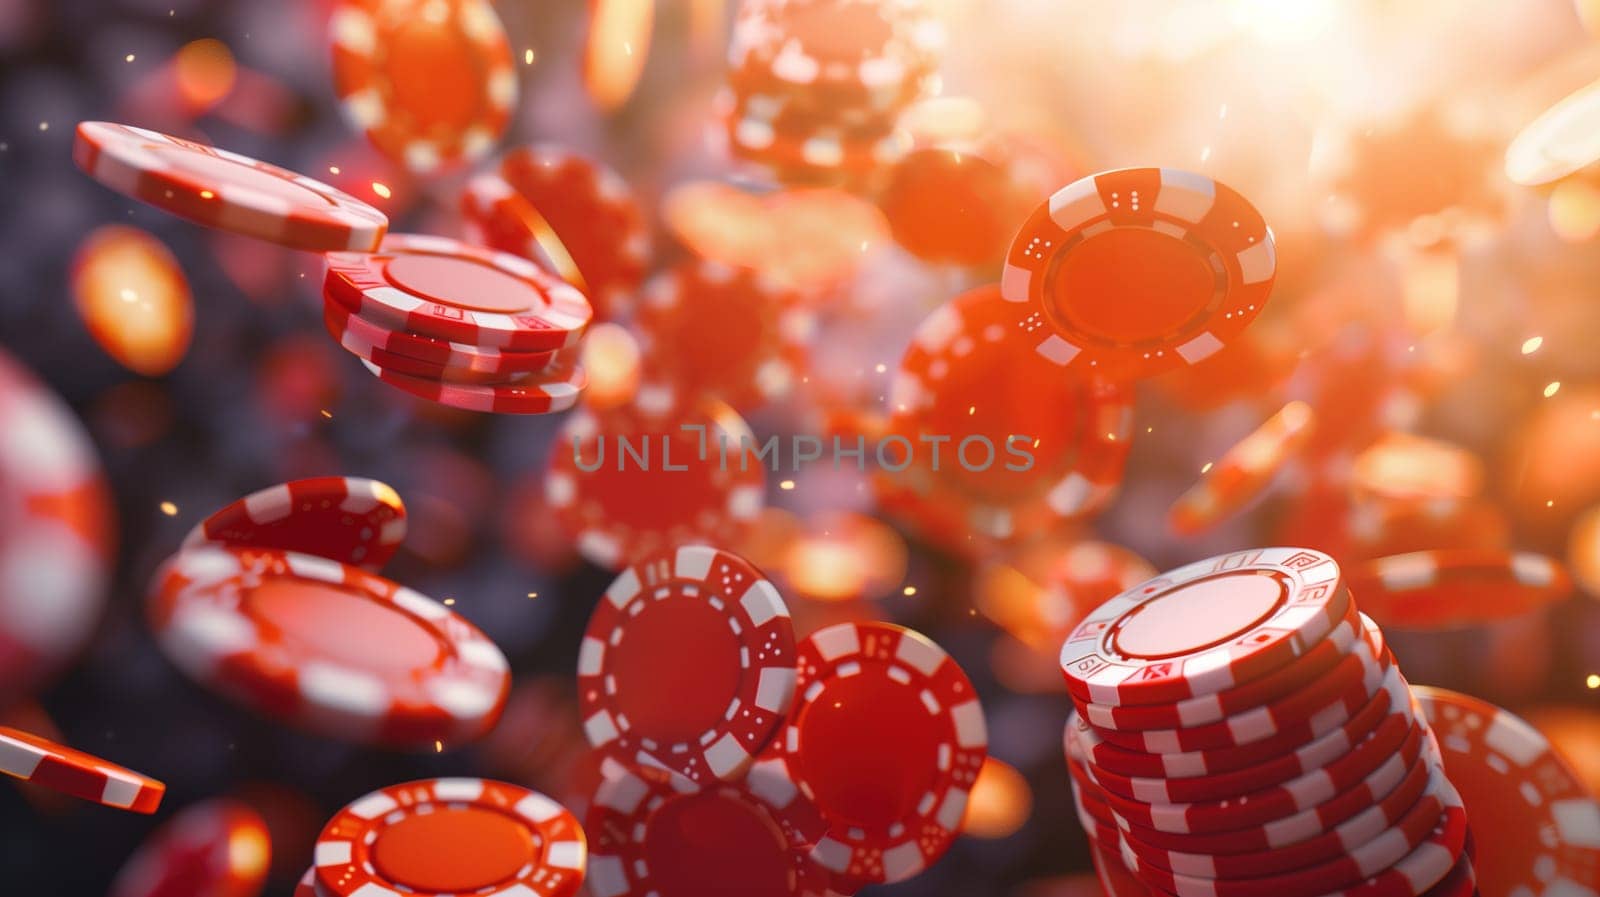 A multitude of red casino chips raining down from above in a chaotic and vibrant display, symbolizing a flurry of gambling activity and excitement.